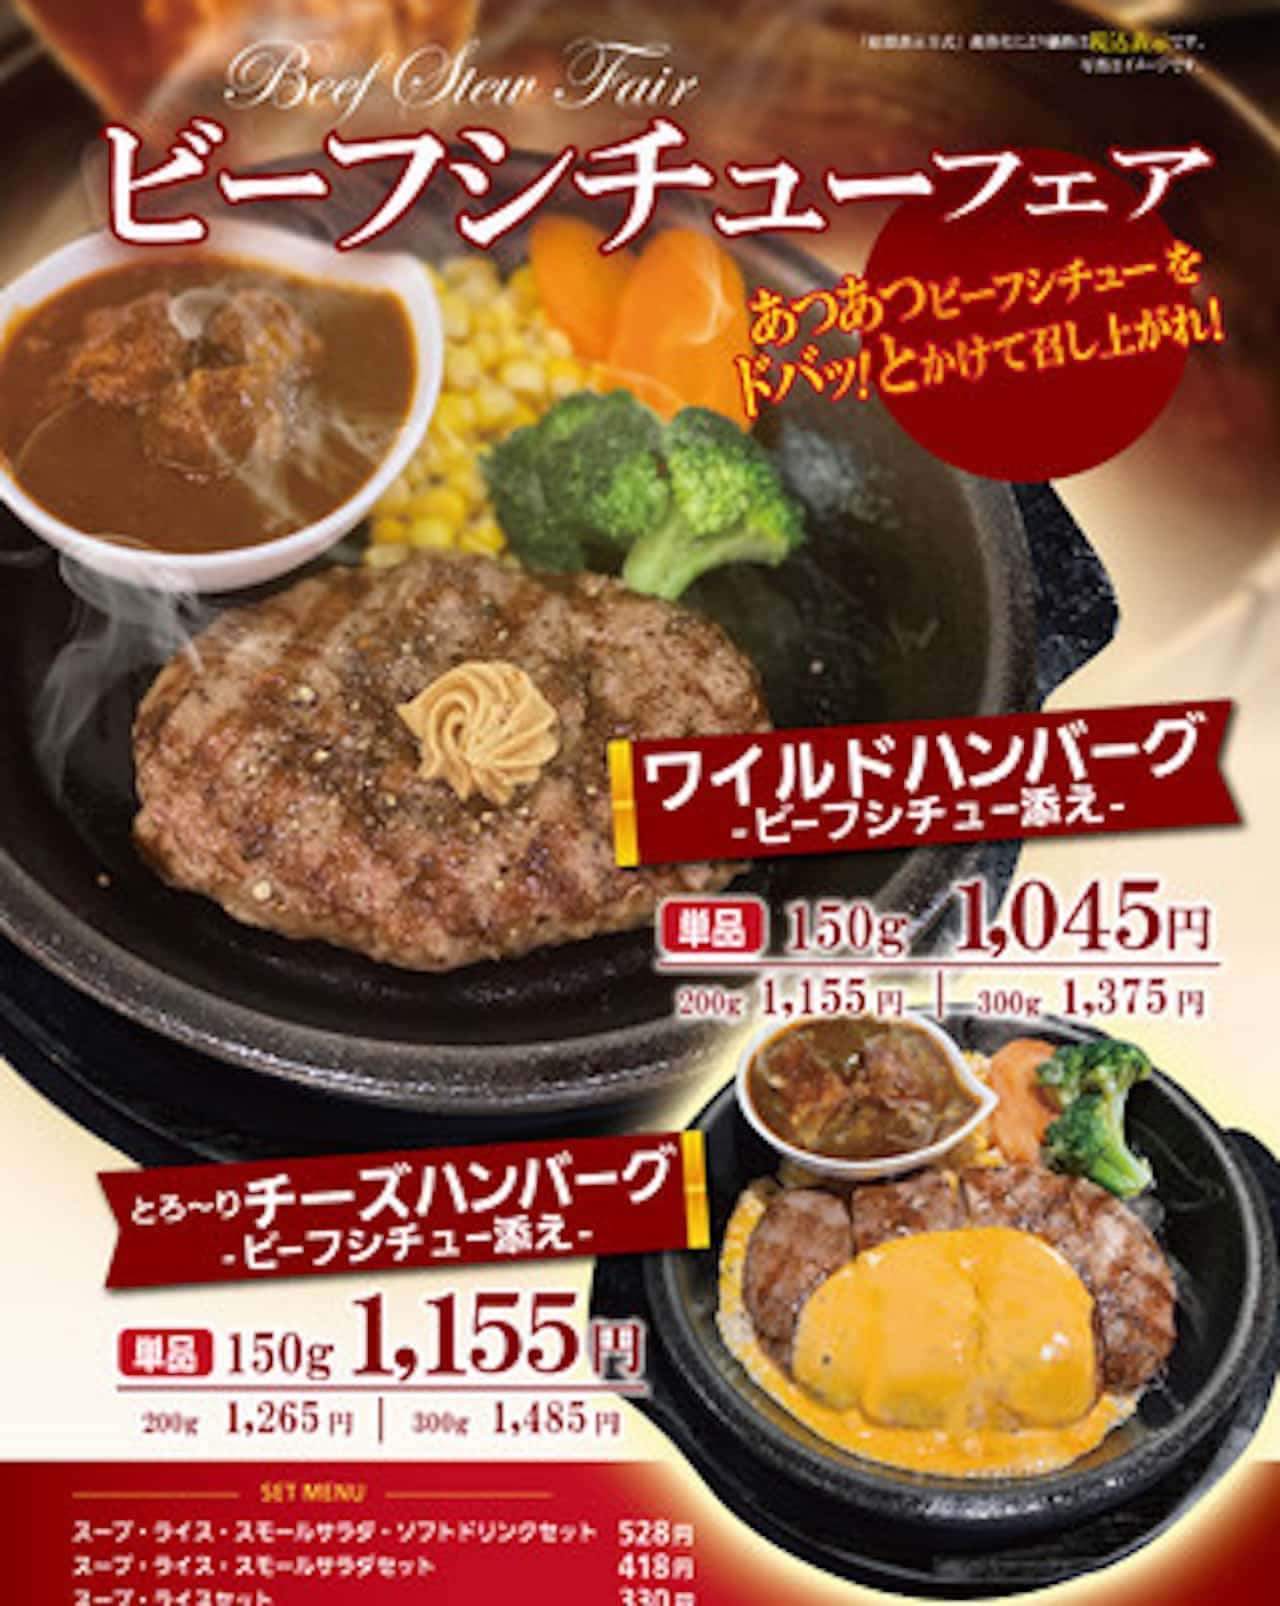 Suddenly! Steak "Beef Steak Fair" for a limited time